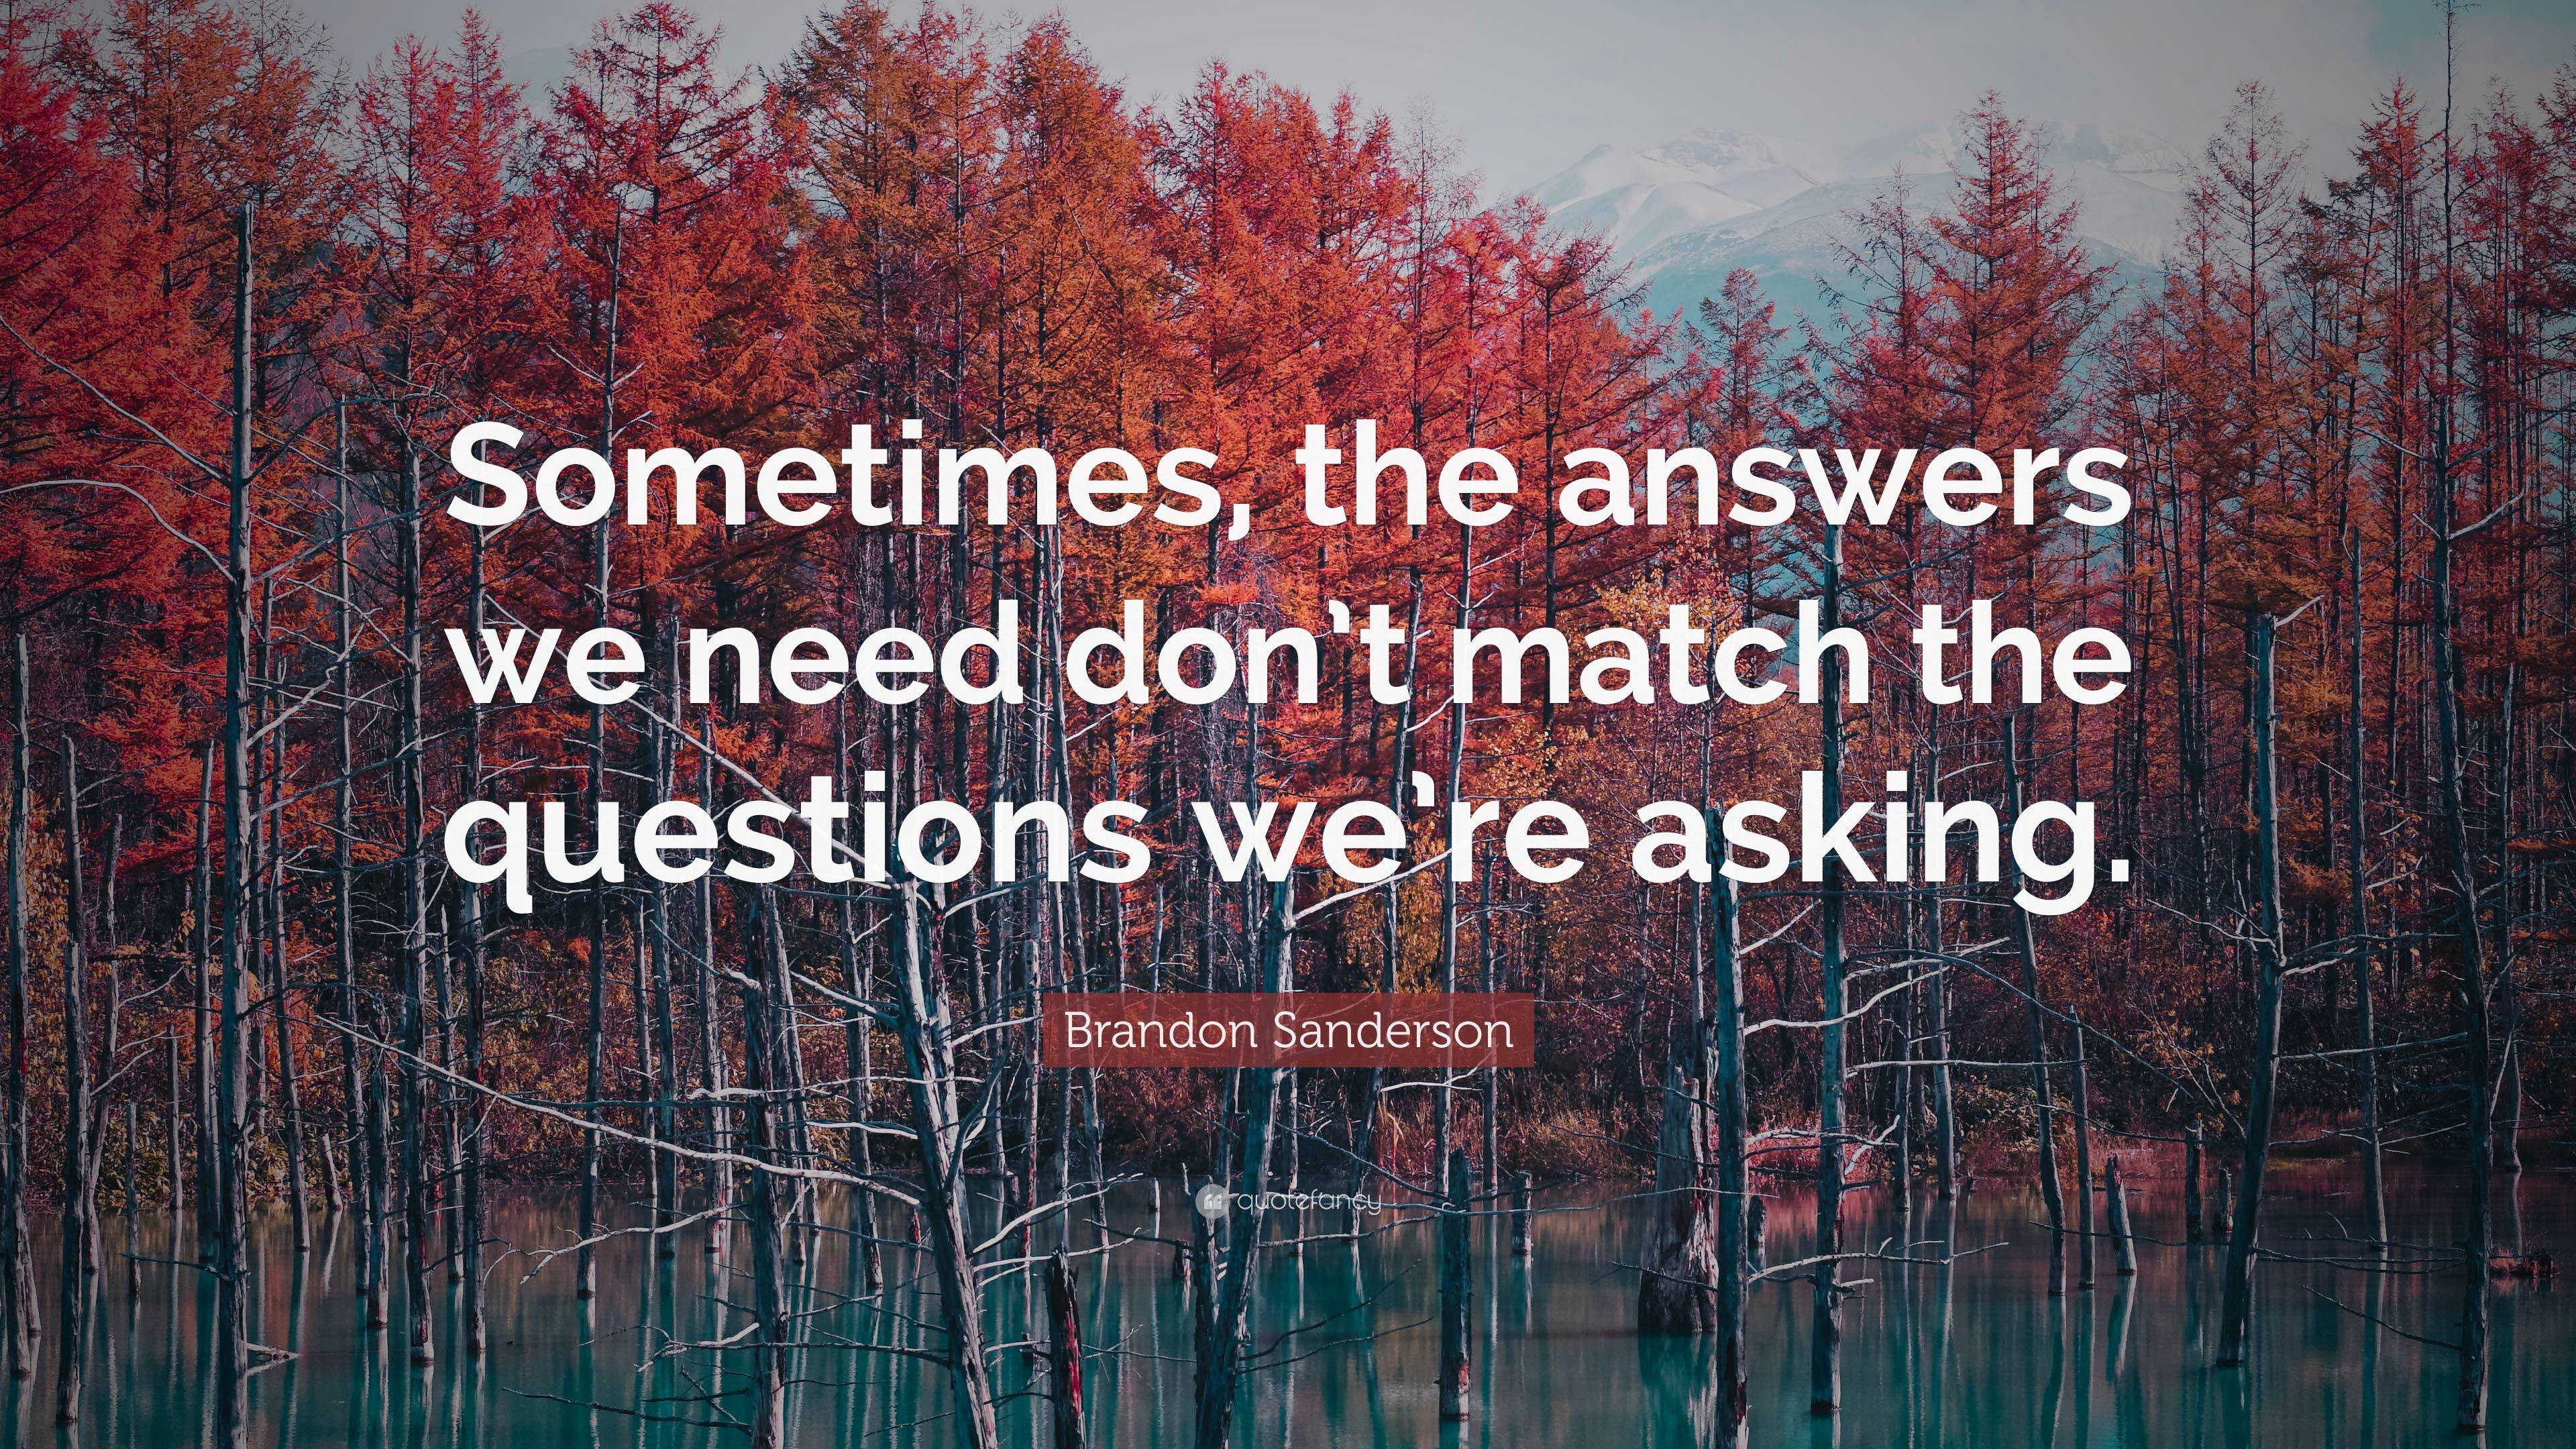 Brandon Sanderson Quote: “Sometimes, the answers we need don’t match ...